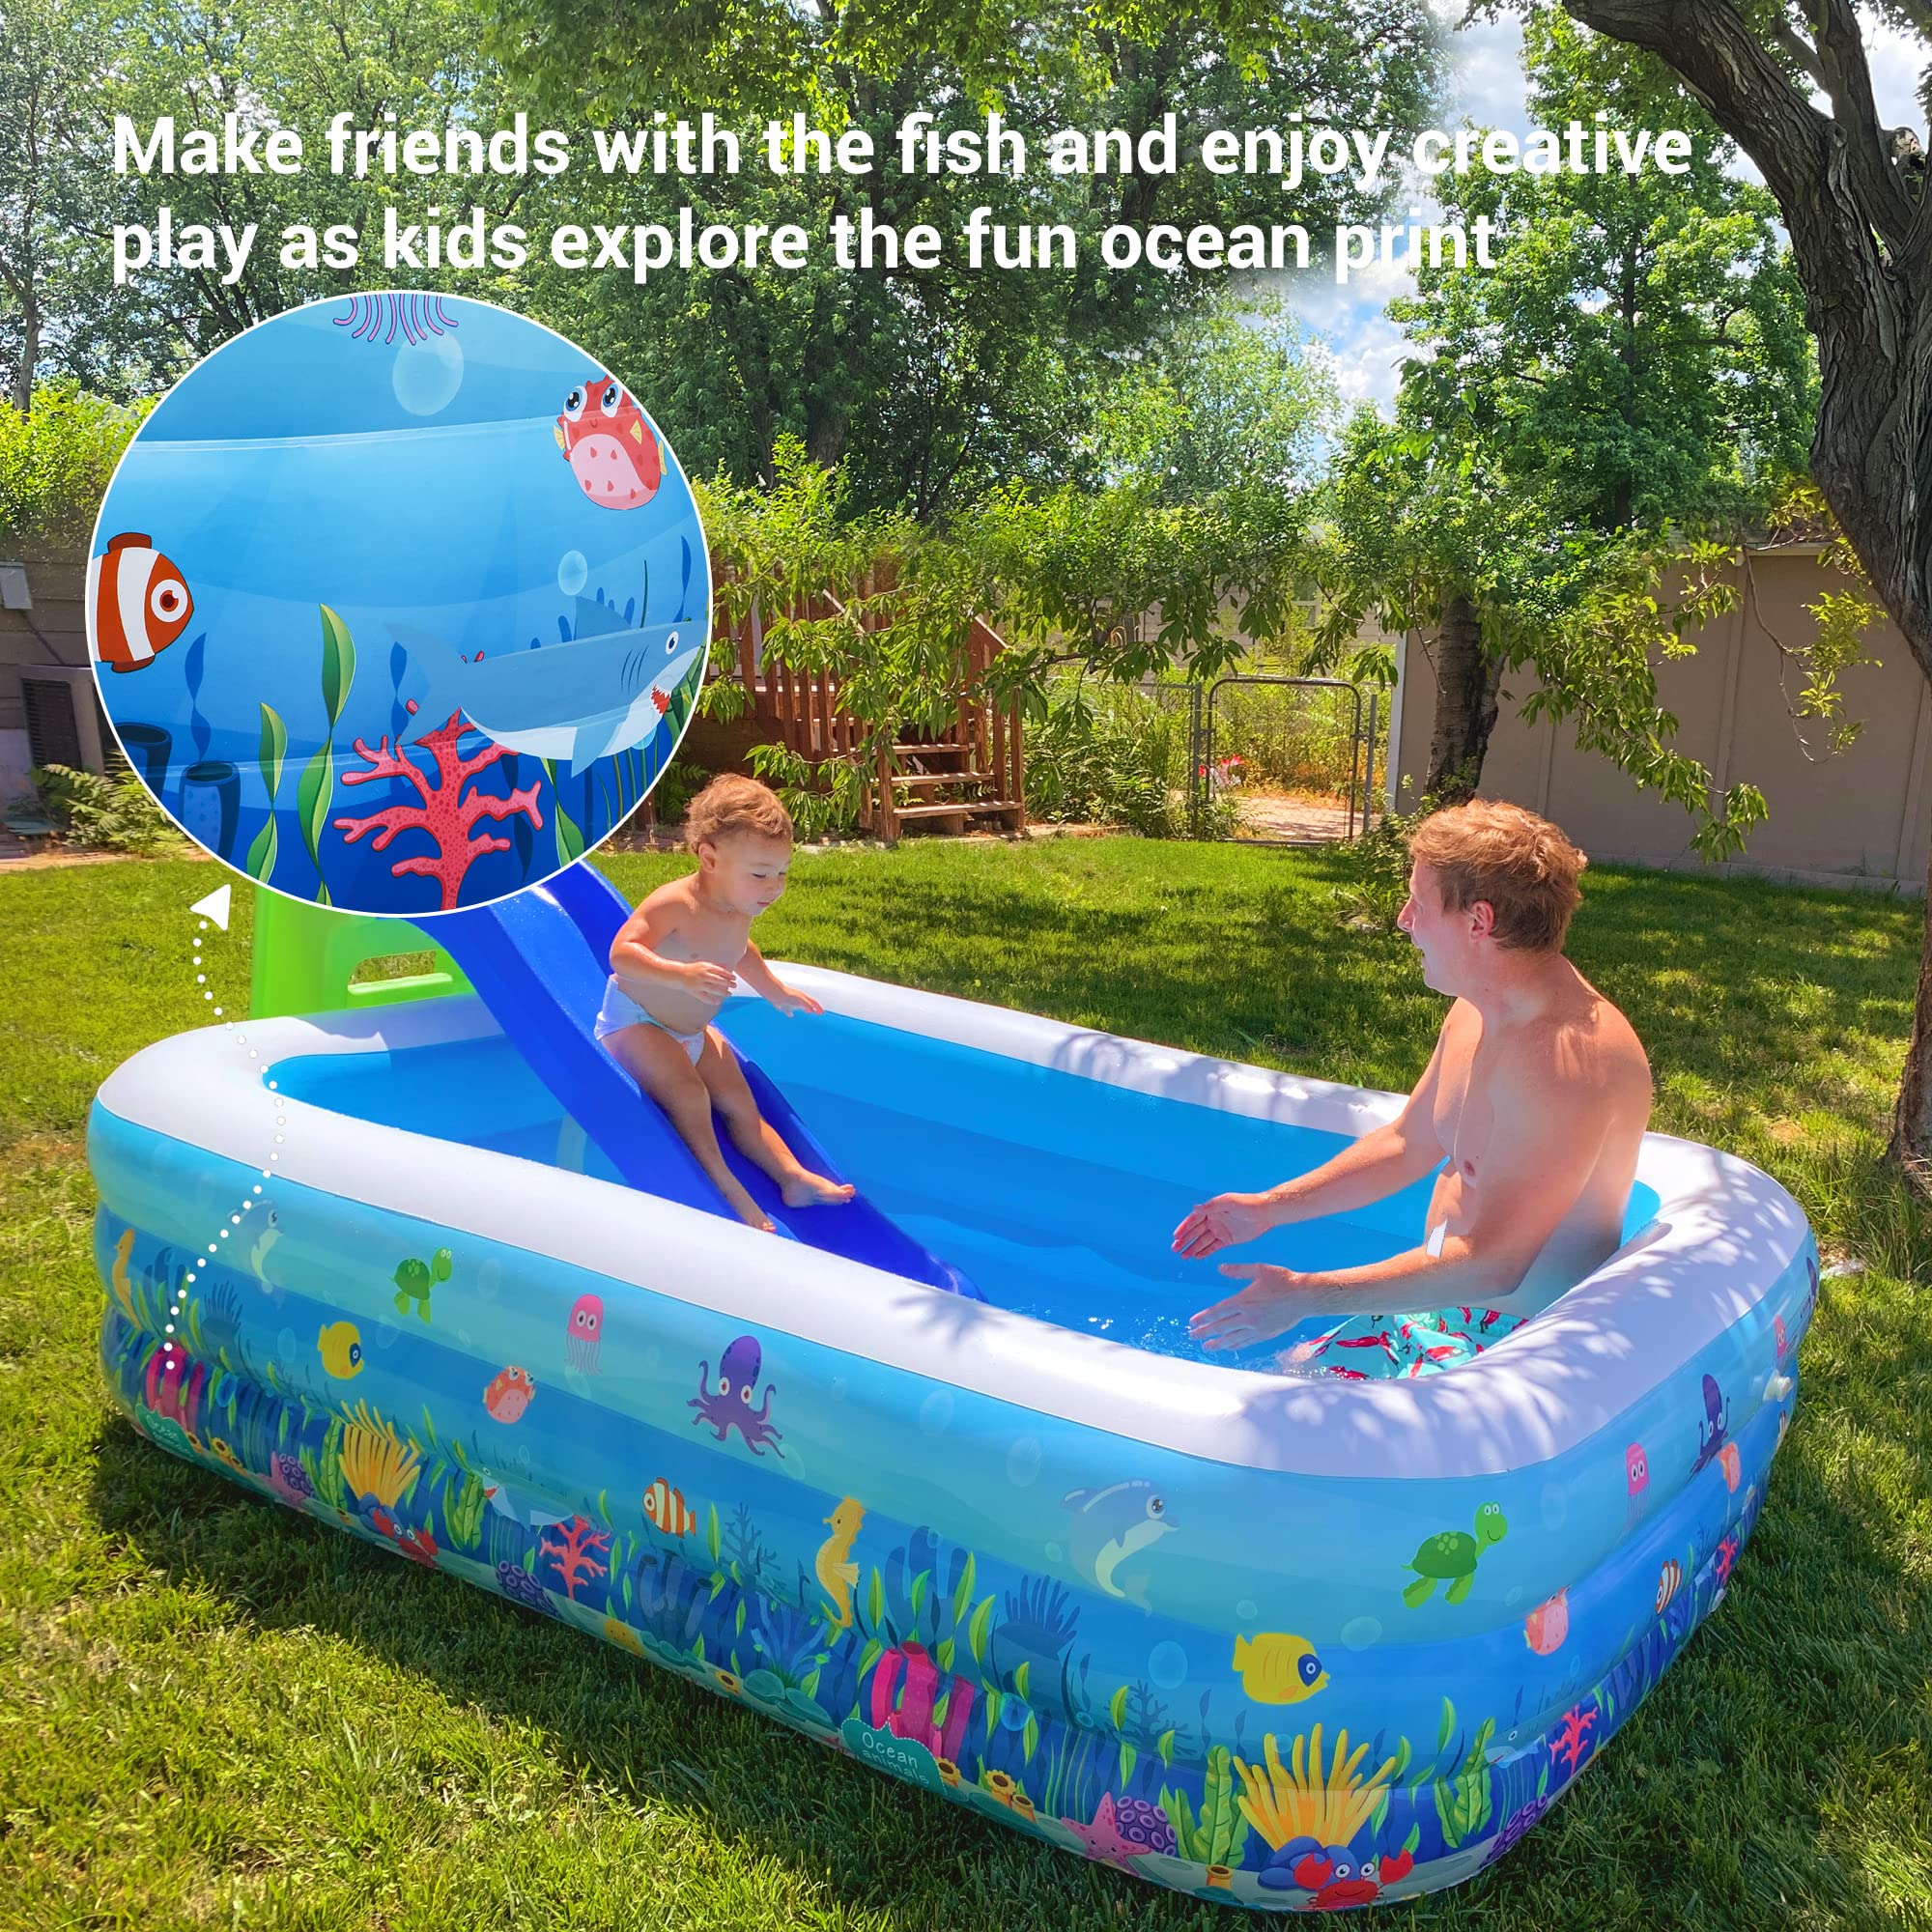 Coastrail Outdoor Inflatable Swimming Pool Full-Sized for Kids, Kiddie, Adult, 71''x 55''x 24'' Rectangular Printed Family Blow Up Pool for Outdoors, Backyard, Blue